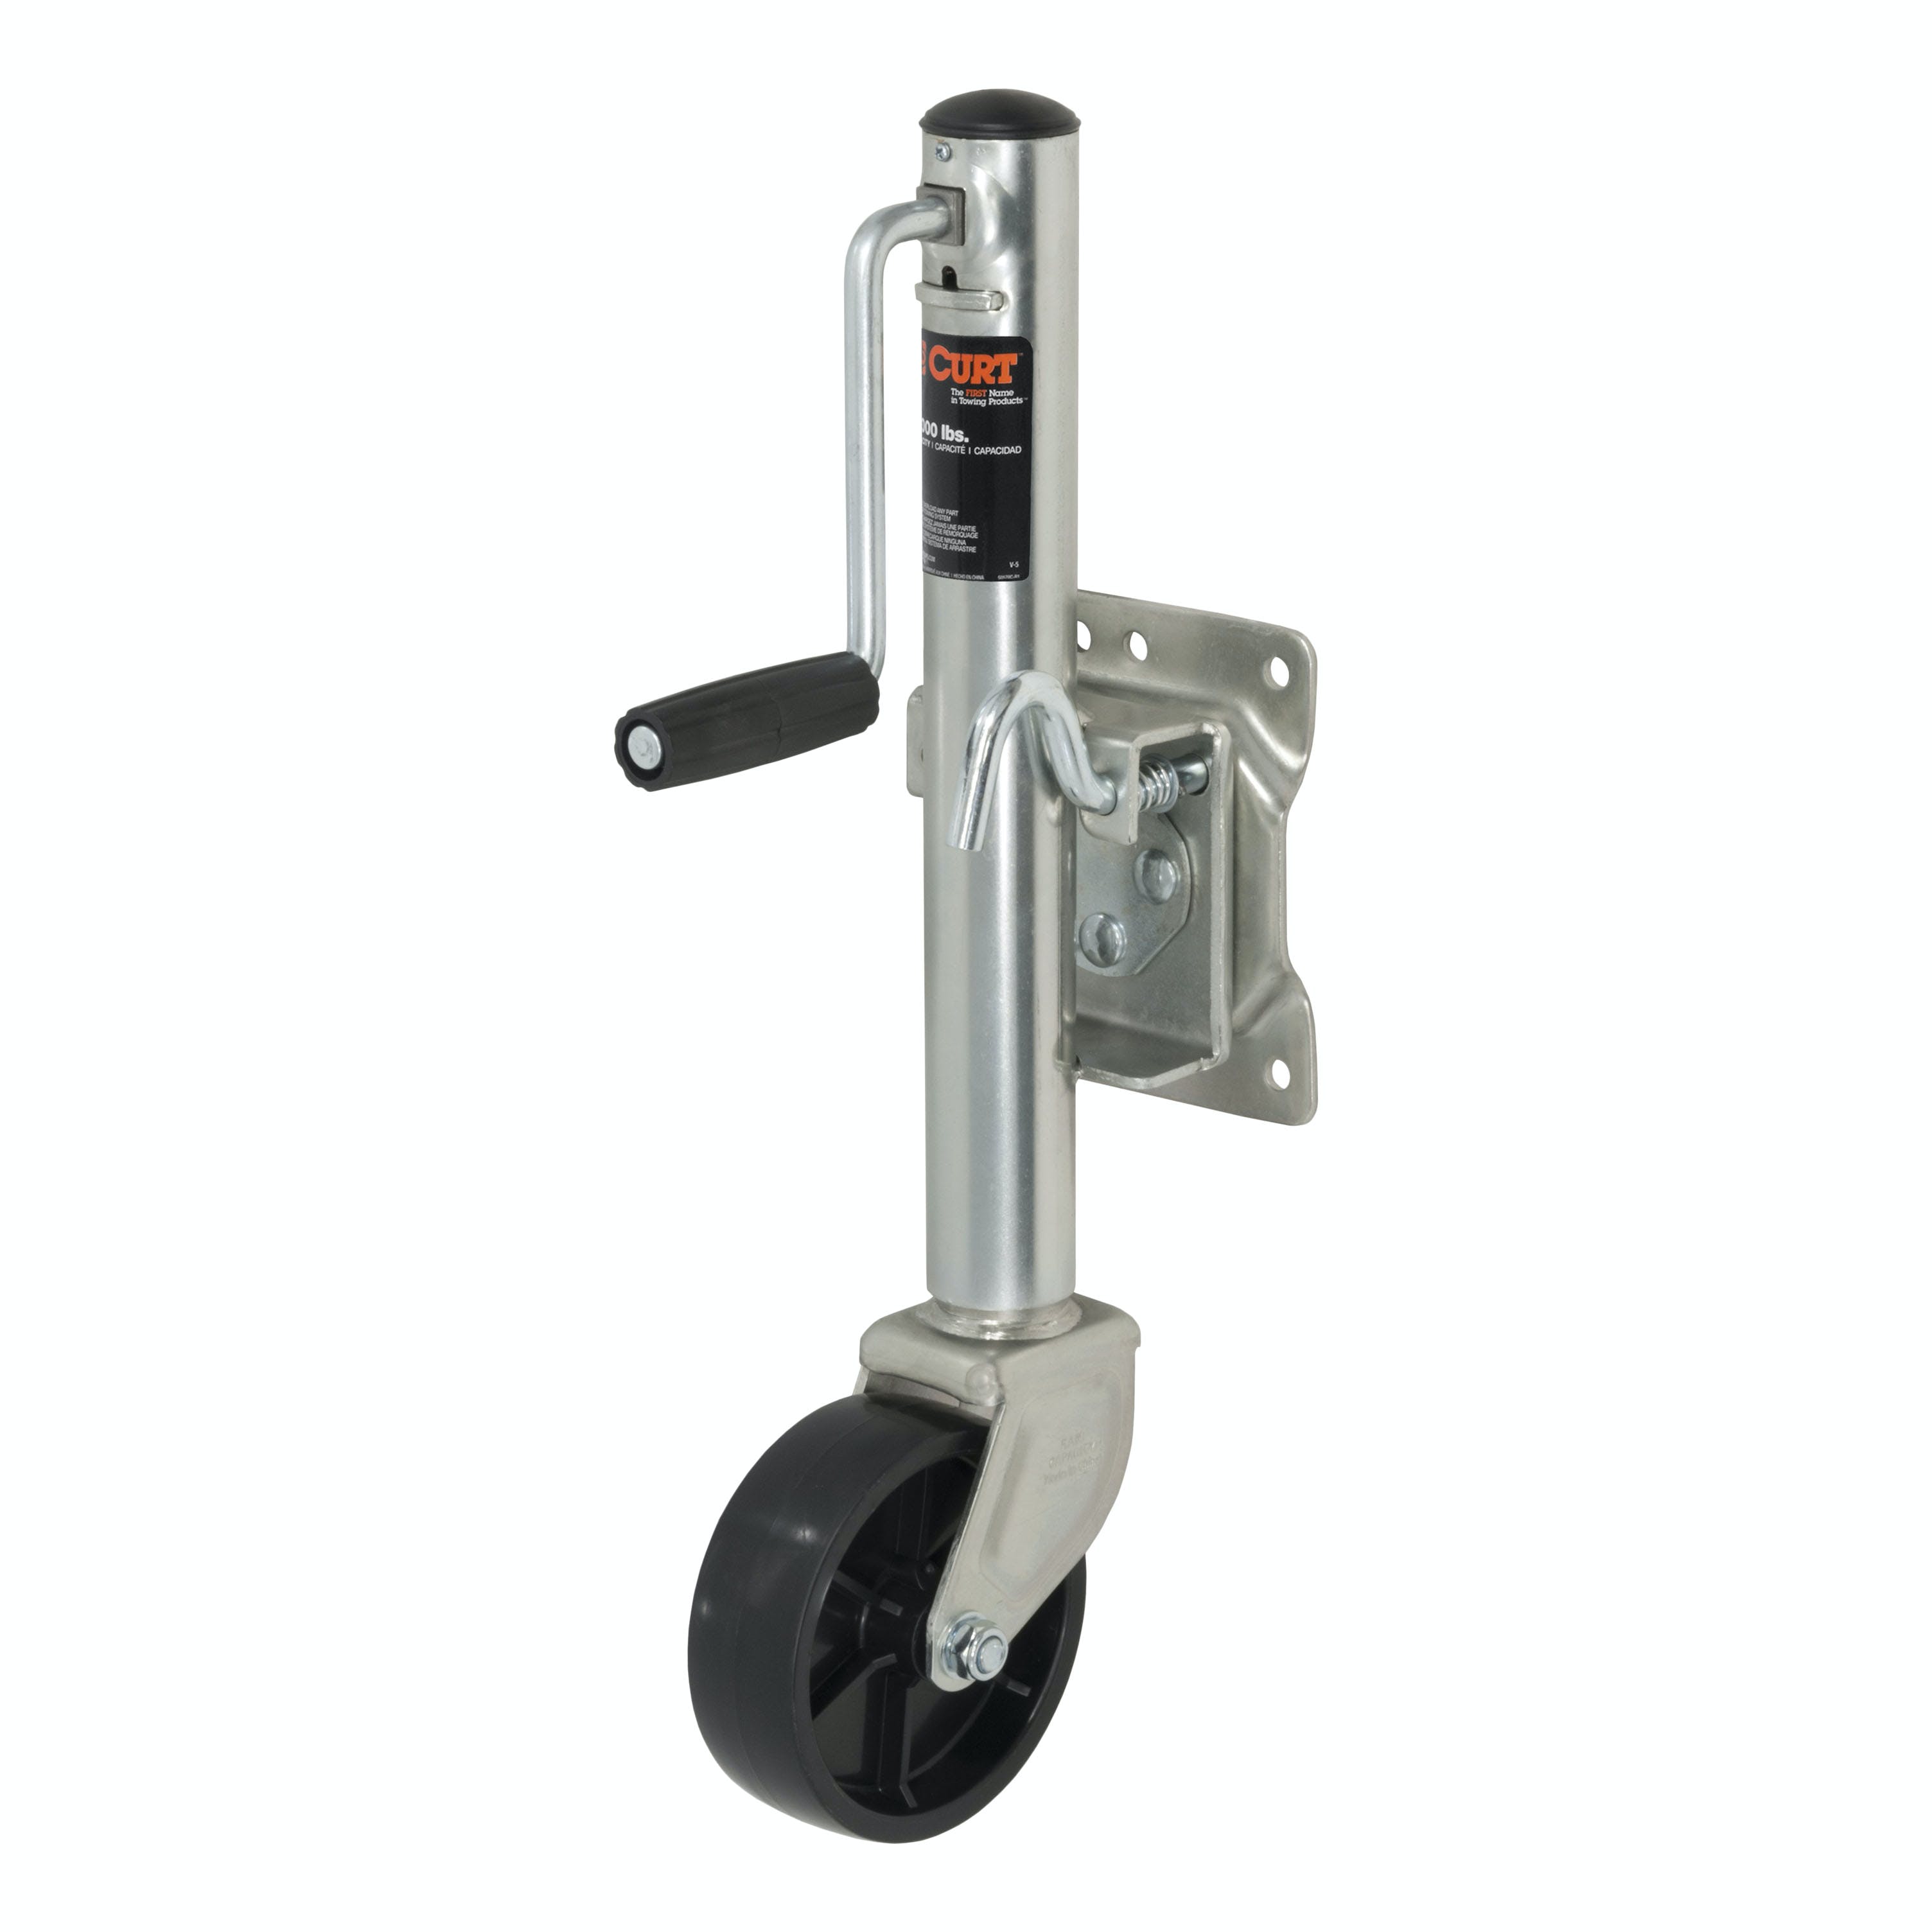 CURT 28113 Marine Jack with 6 Wheel (1,200 lbs, 10 Travel, Packaged)